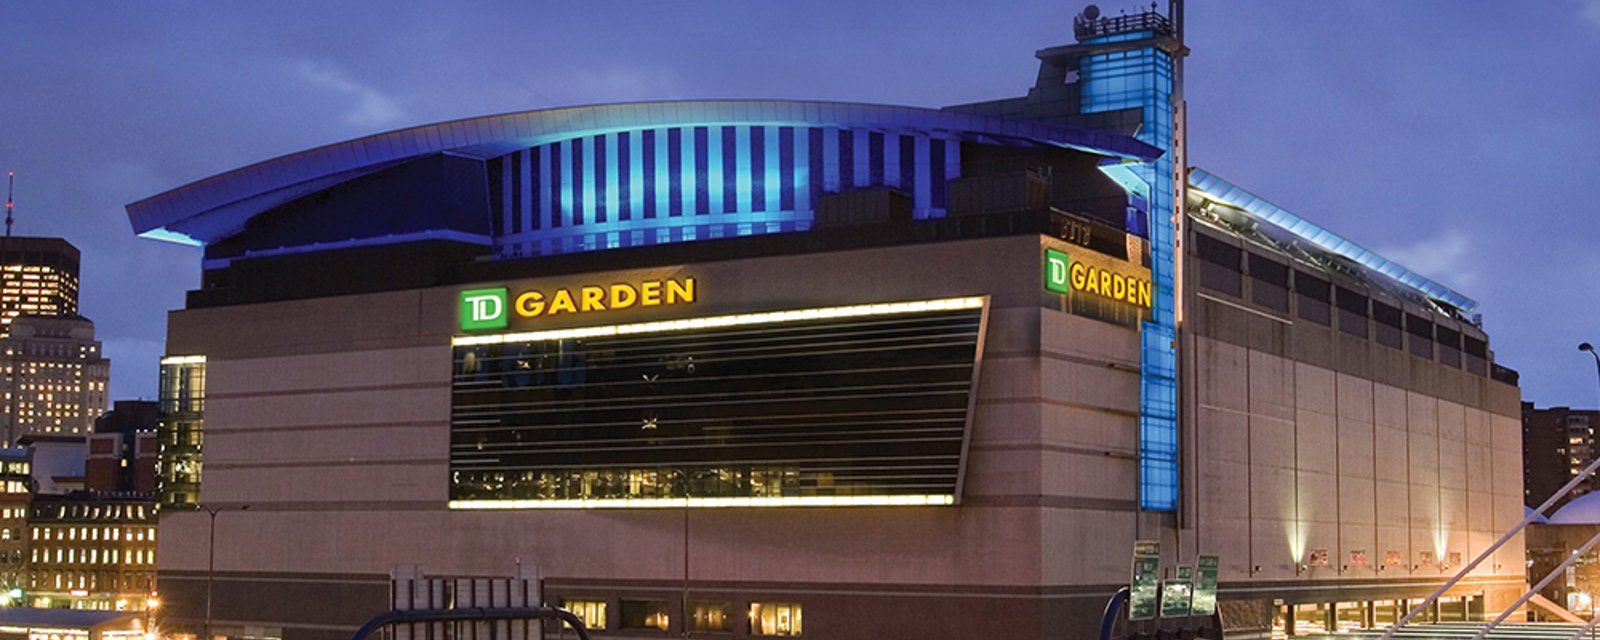 New TD Garden scoreboard nearly completed 